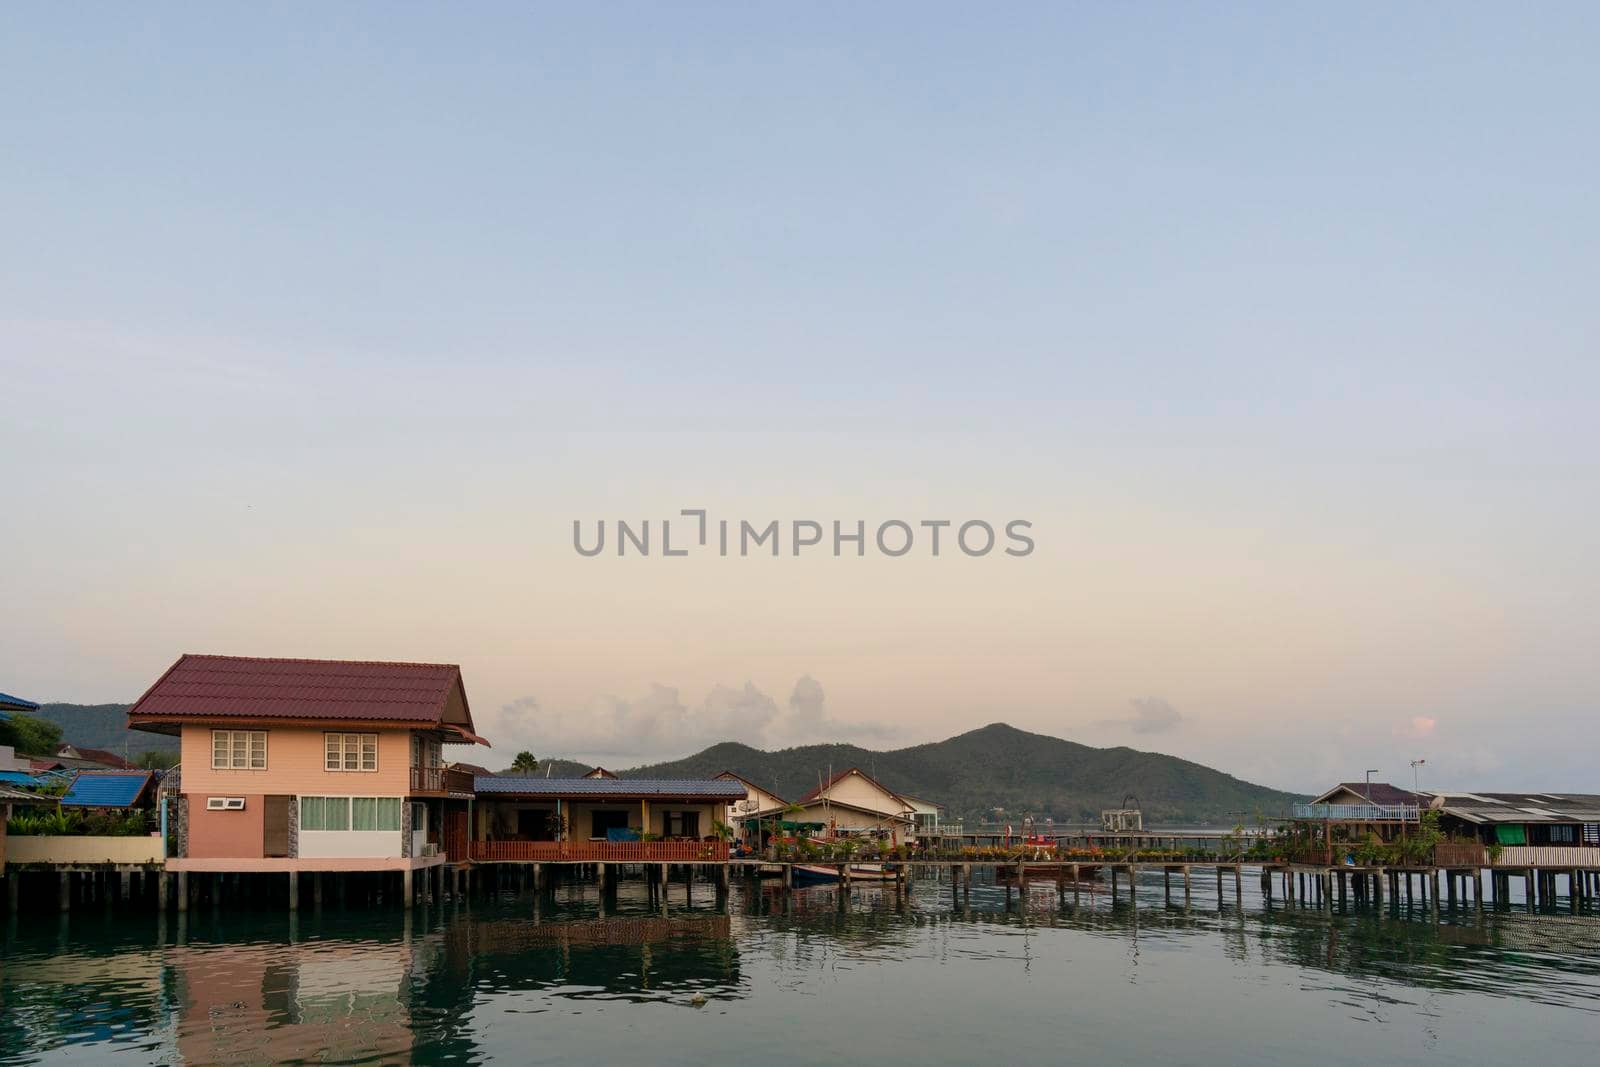 Fisherman's house and seaside house in Sattahip, reflecting with the water surface. Bright sky